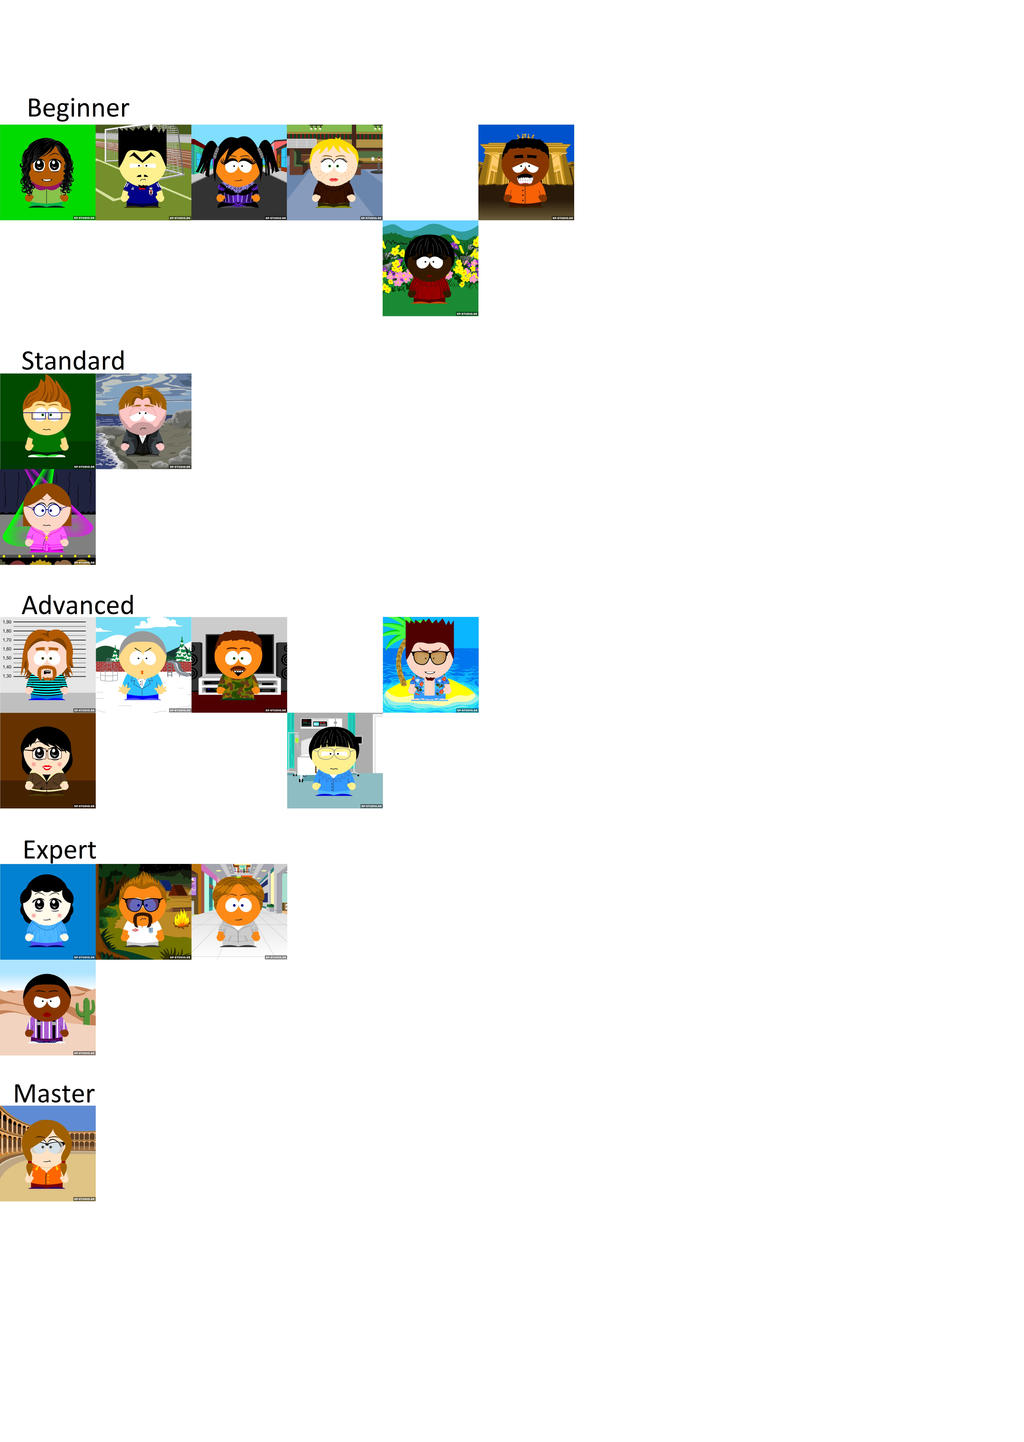 canal maintain Word Wii Series Miis- South Park Version by Sulu2021 on DeviantArt